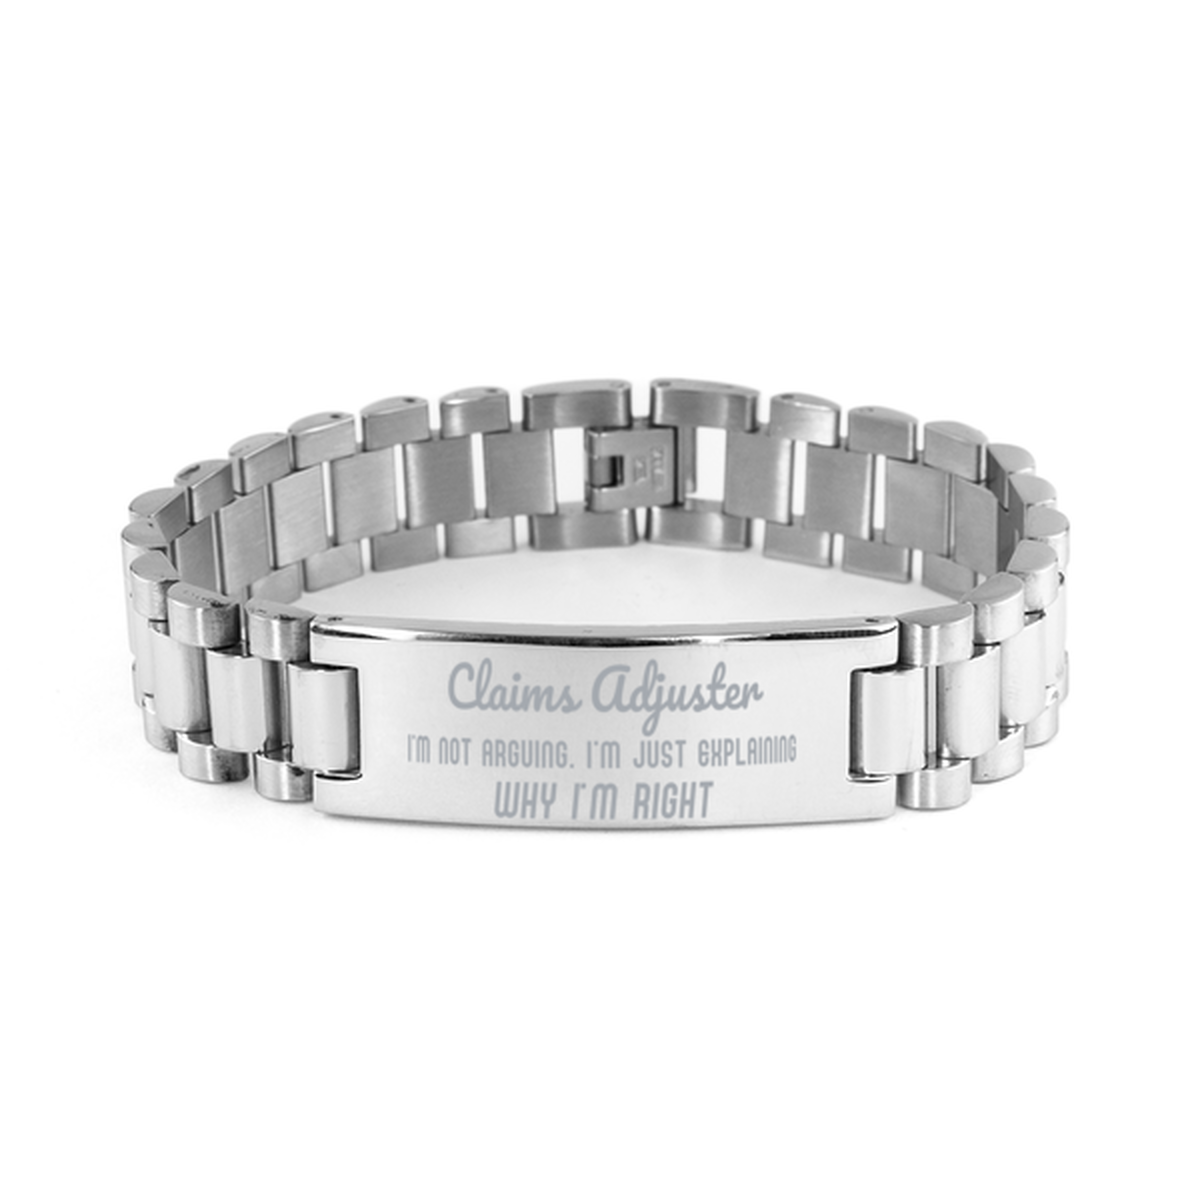 Claims Adjuster I'm not Arguing. I'm Just Explaining Why I'm RIGHT Ladder Stainless Steel Bracelet, Graduation Birthday Christmas Claims Adjuster Gifts For Claims Adjuster Funny Saying Quote Present for Men Women Coworker